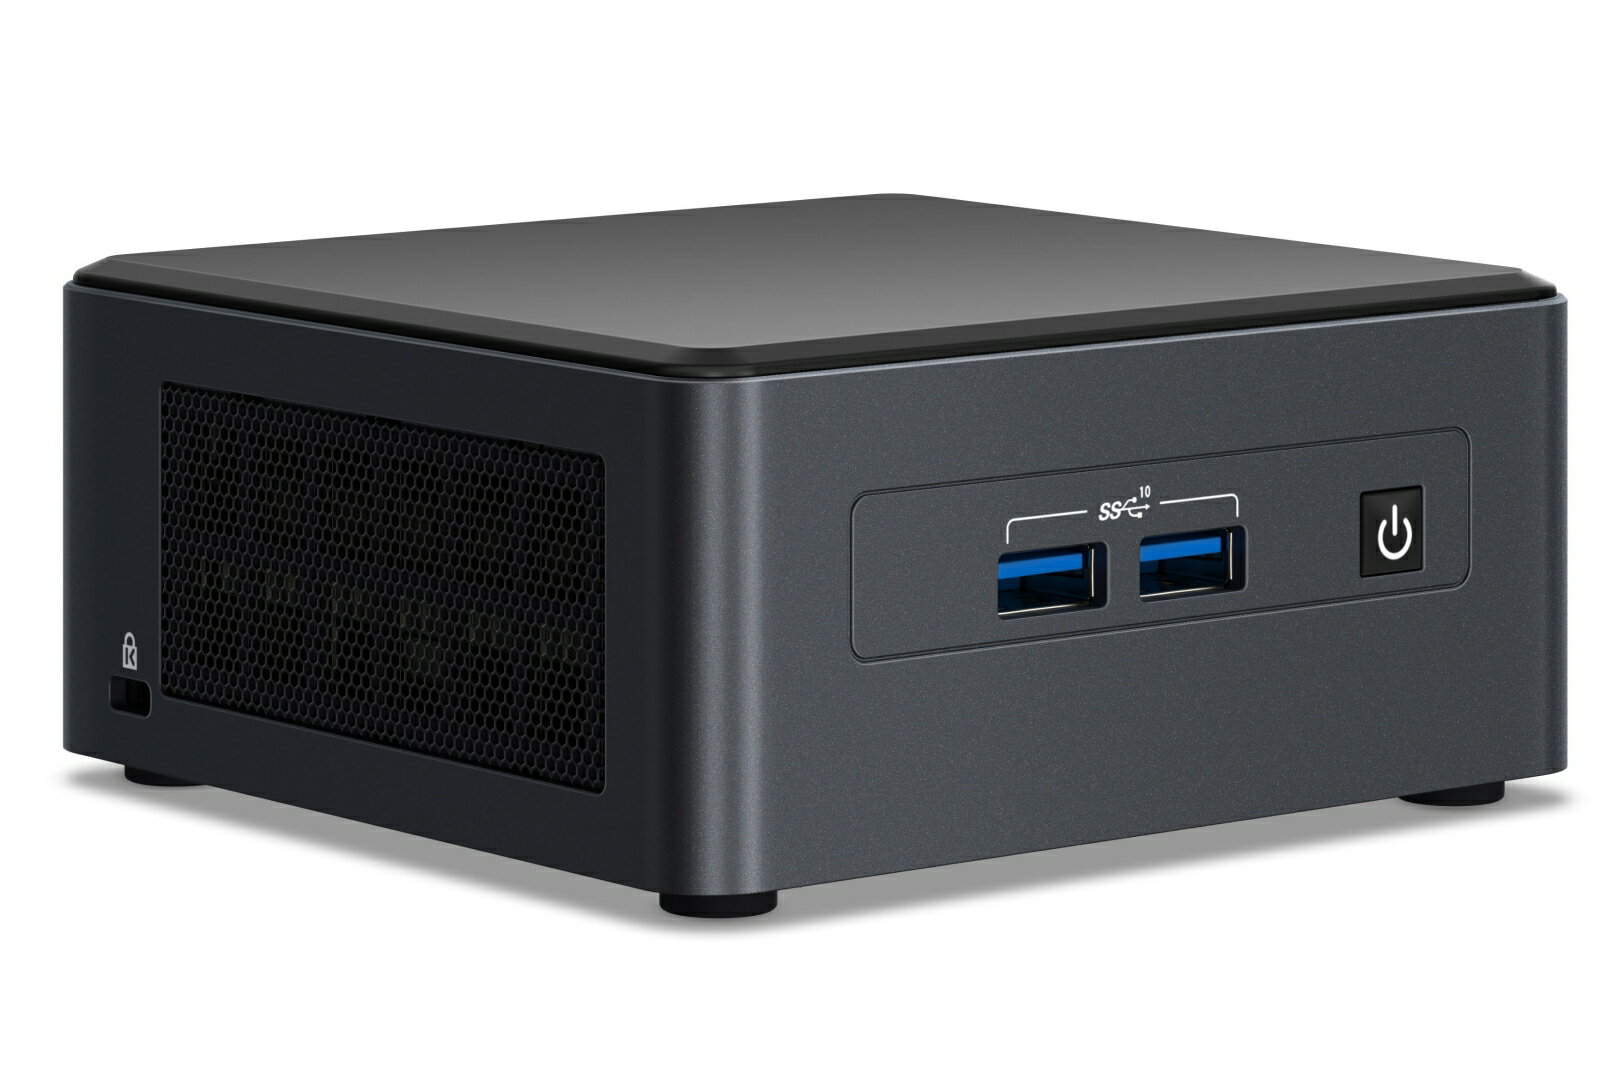 ＜NUC11TNHi5＞intel第11世代Corei5-1135G7（Max 4.2GHz/4 Core/Intel Iris Xe Graphics）搭載NUCキット、 M.2スロット and 2.5” Drive